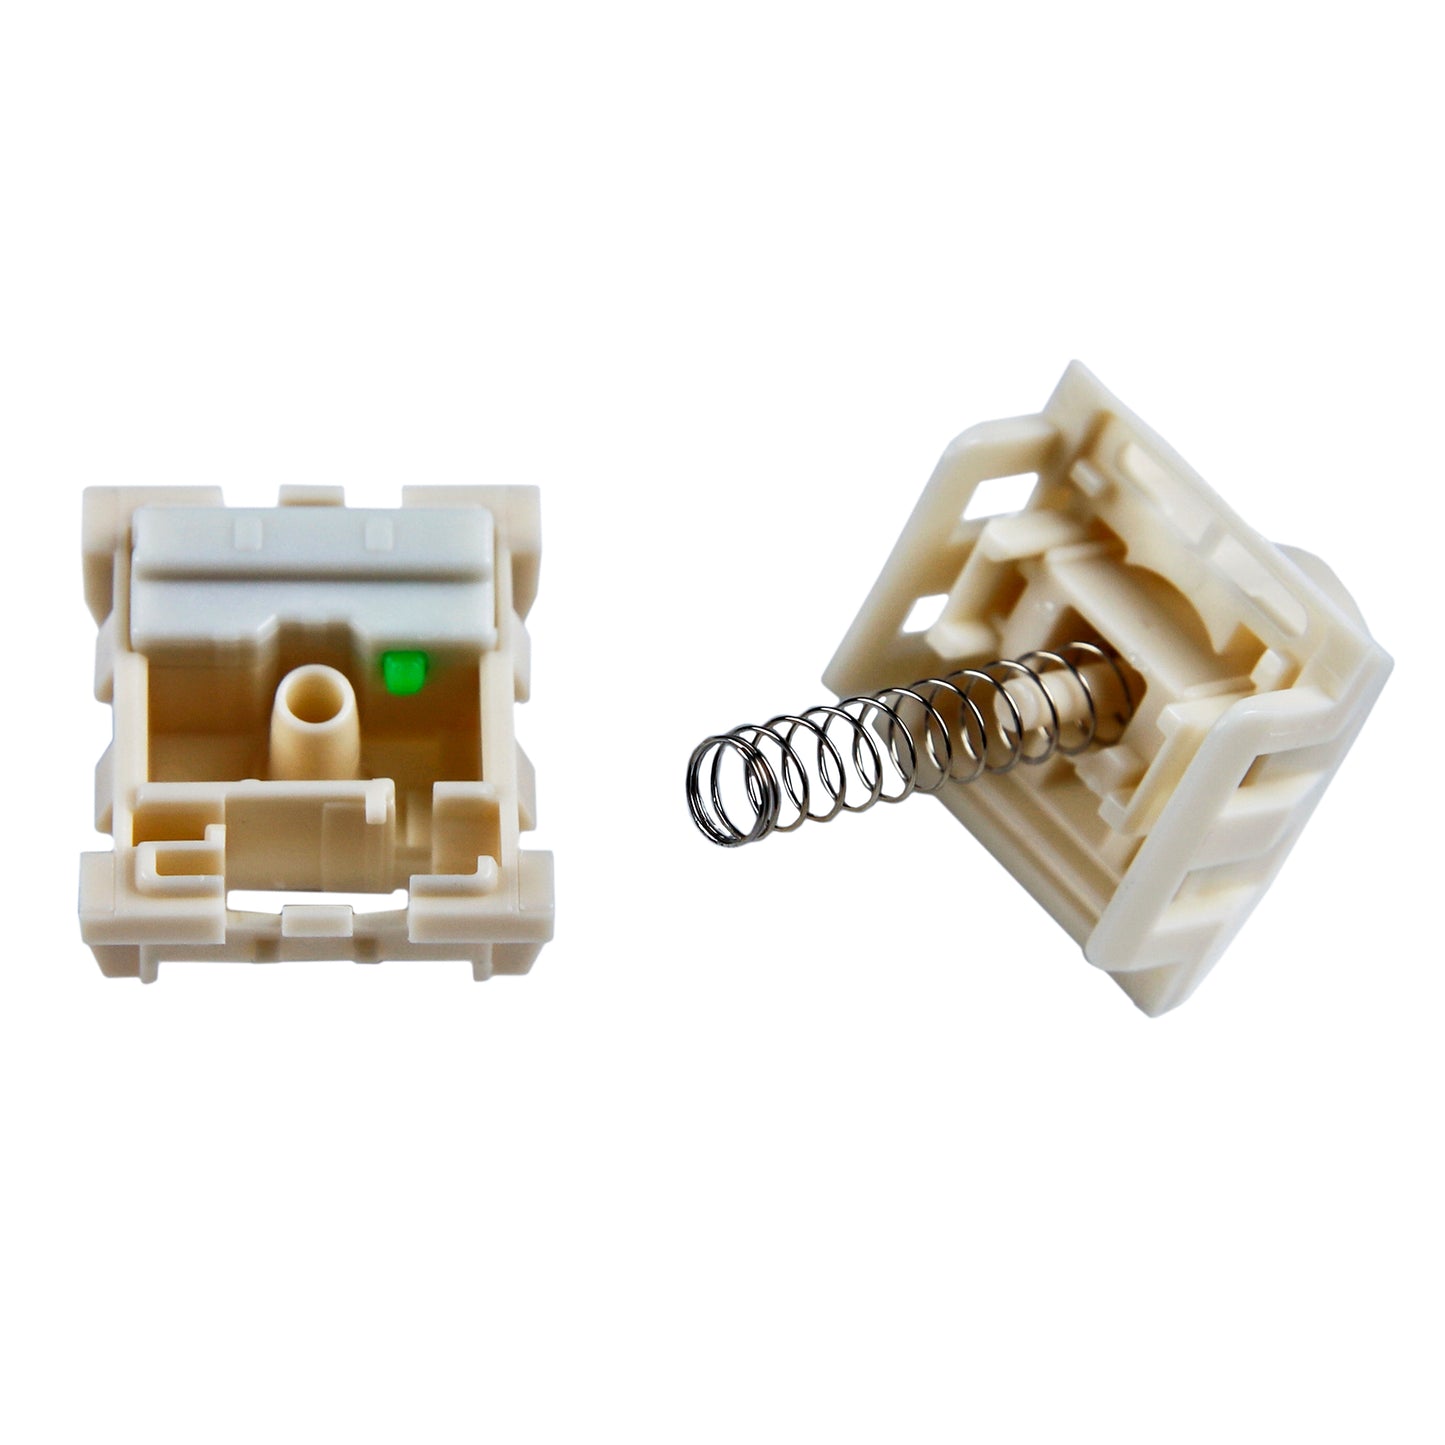 Kailh Novelty Box V2 Cream(Liner 45g 5 Pin POM Switches/Waterproof Dustproof)